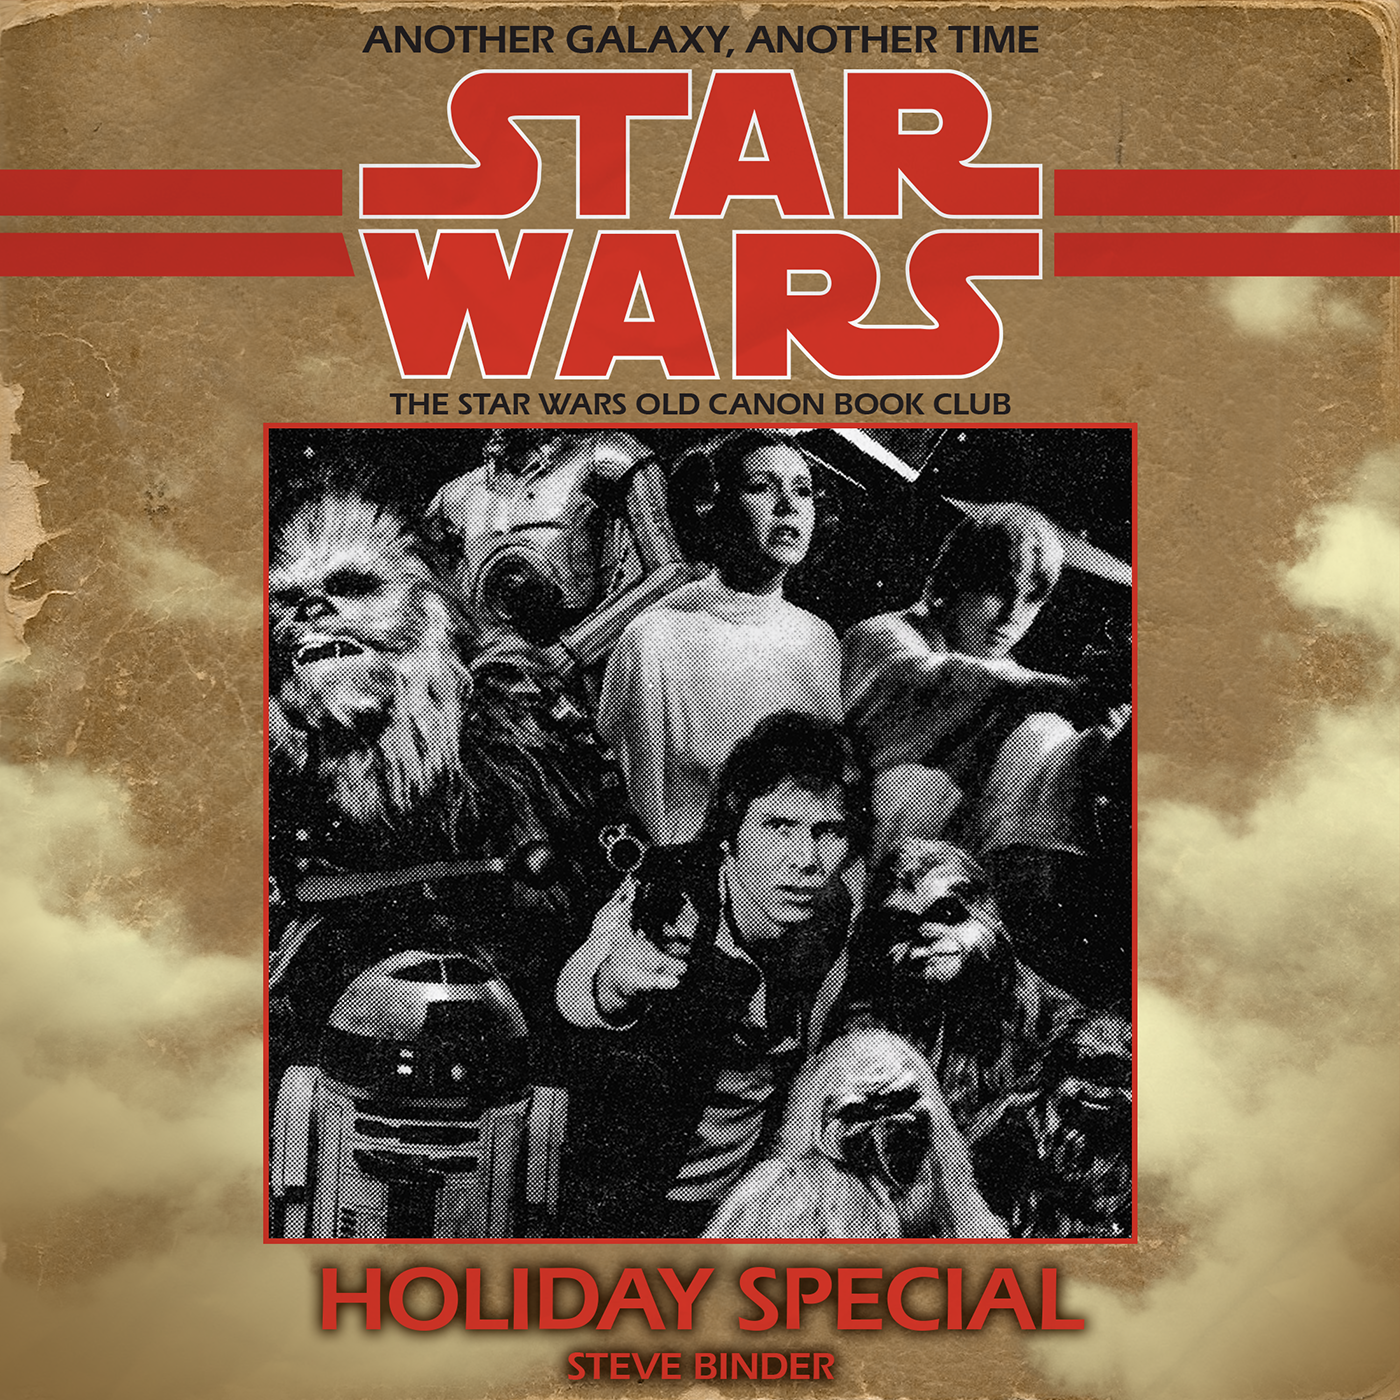 4: The Star Wars Holiday Special